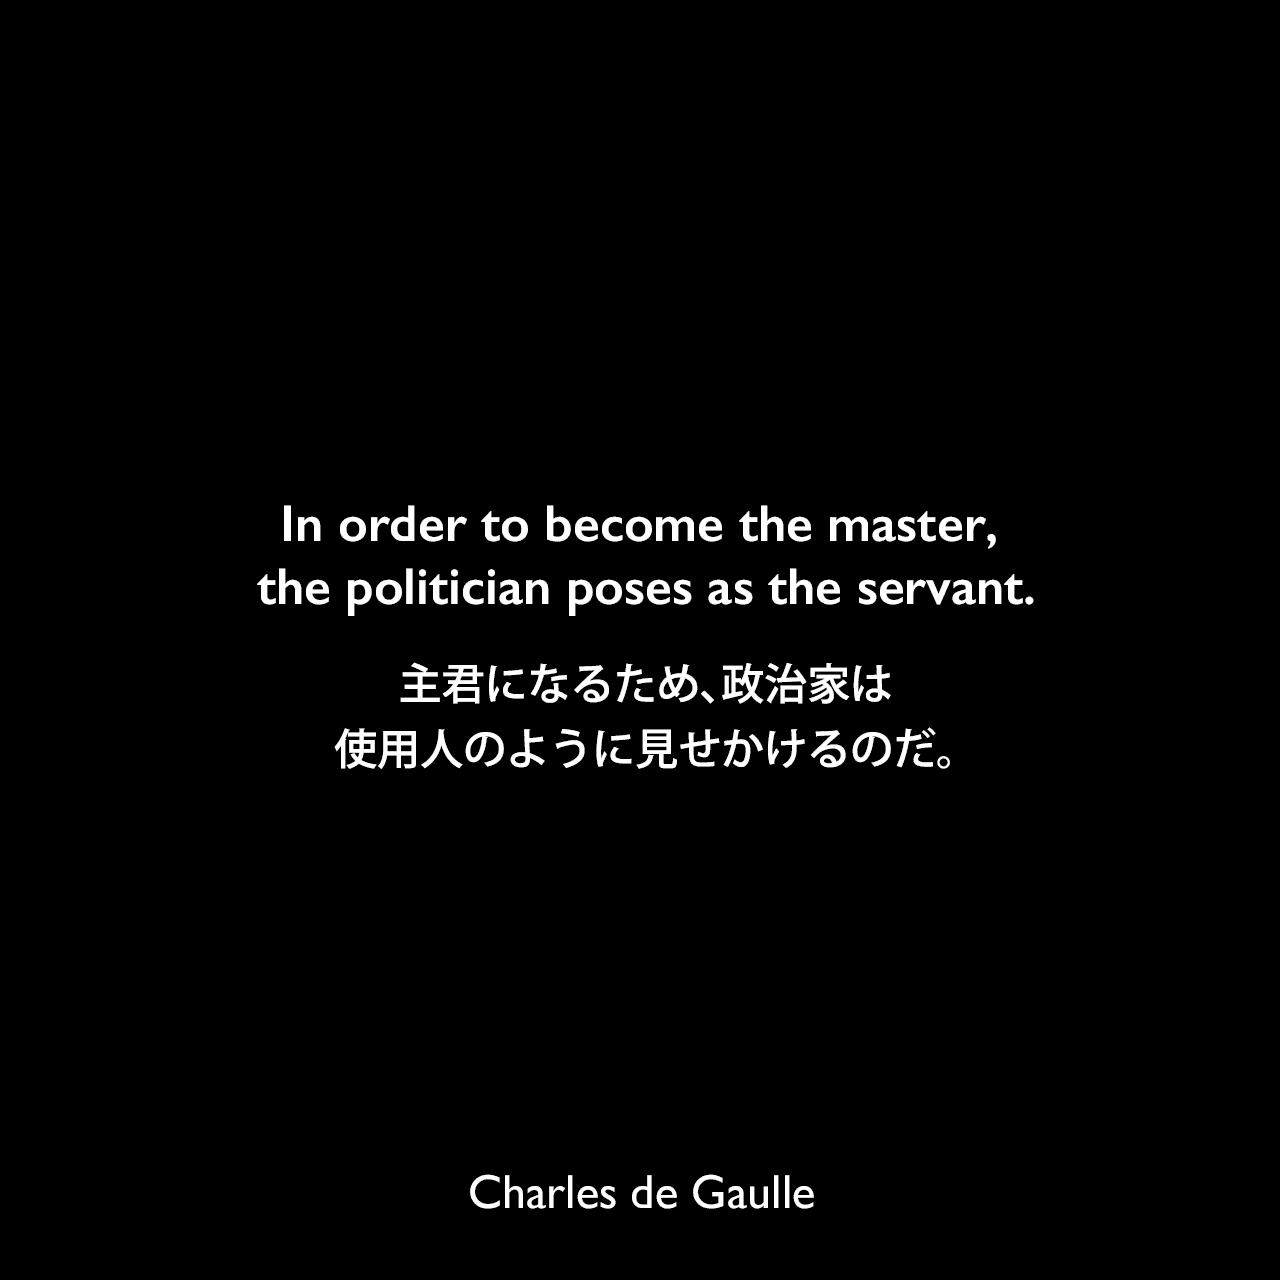 In order to become the master, the politician poses as the servant.主君になるため、政治家は使用人のように見せかけるのだ。Charles de Gaulle